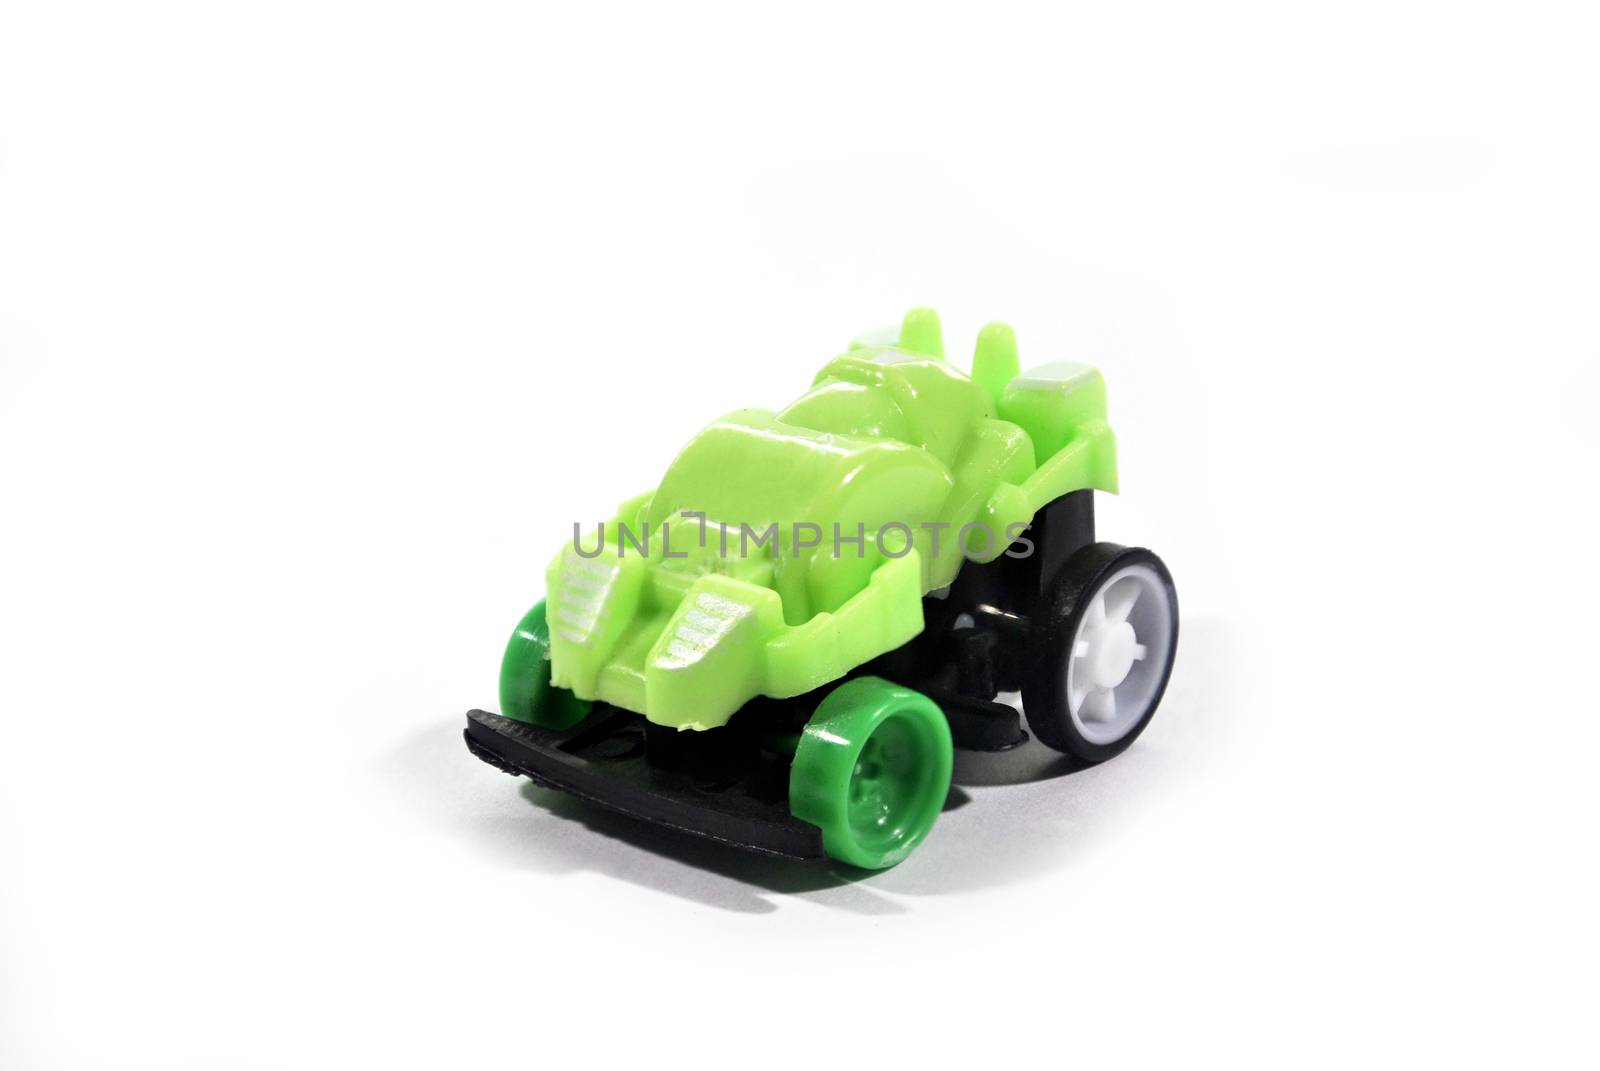 The green toy car is a collection put on a white background.